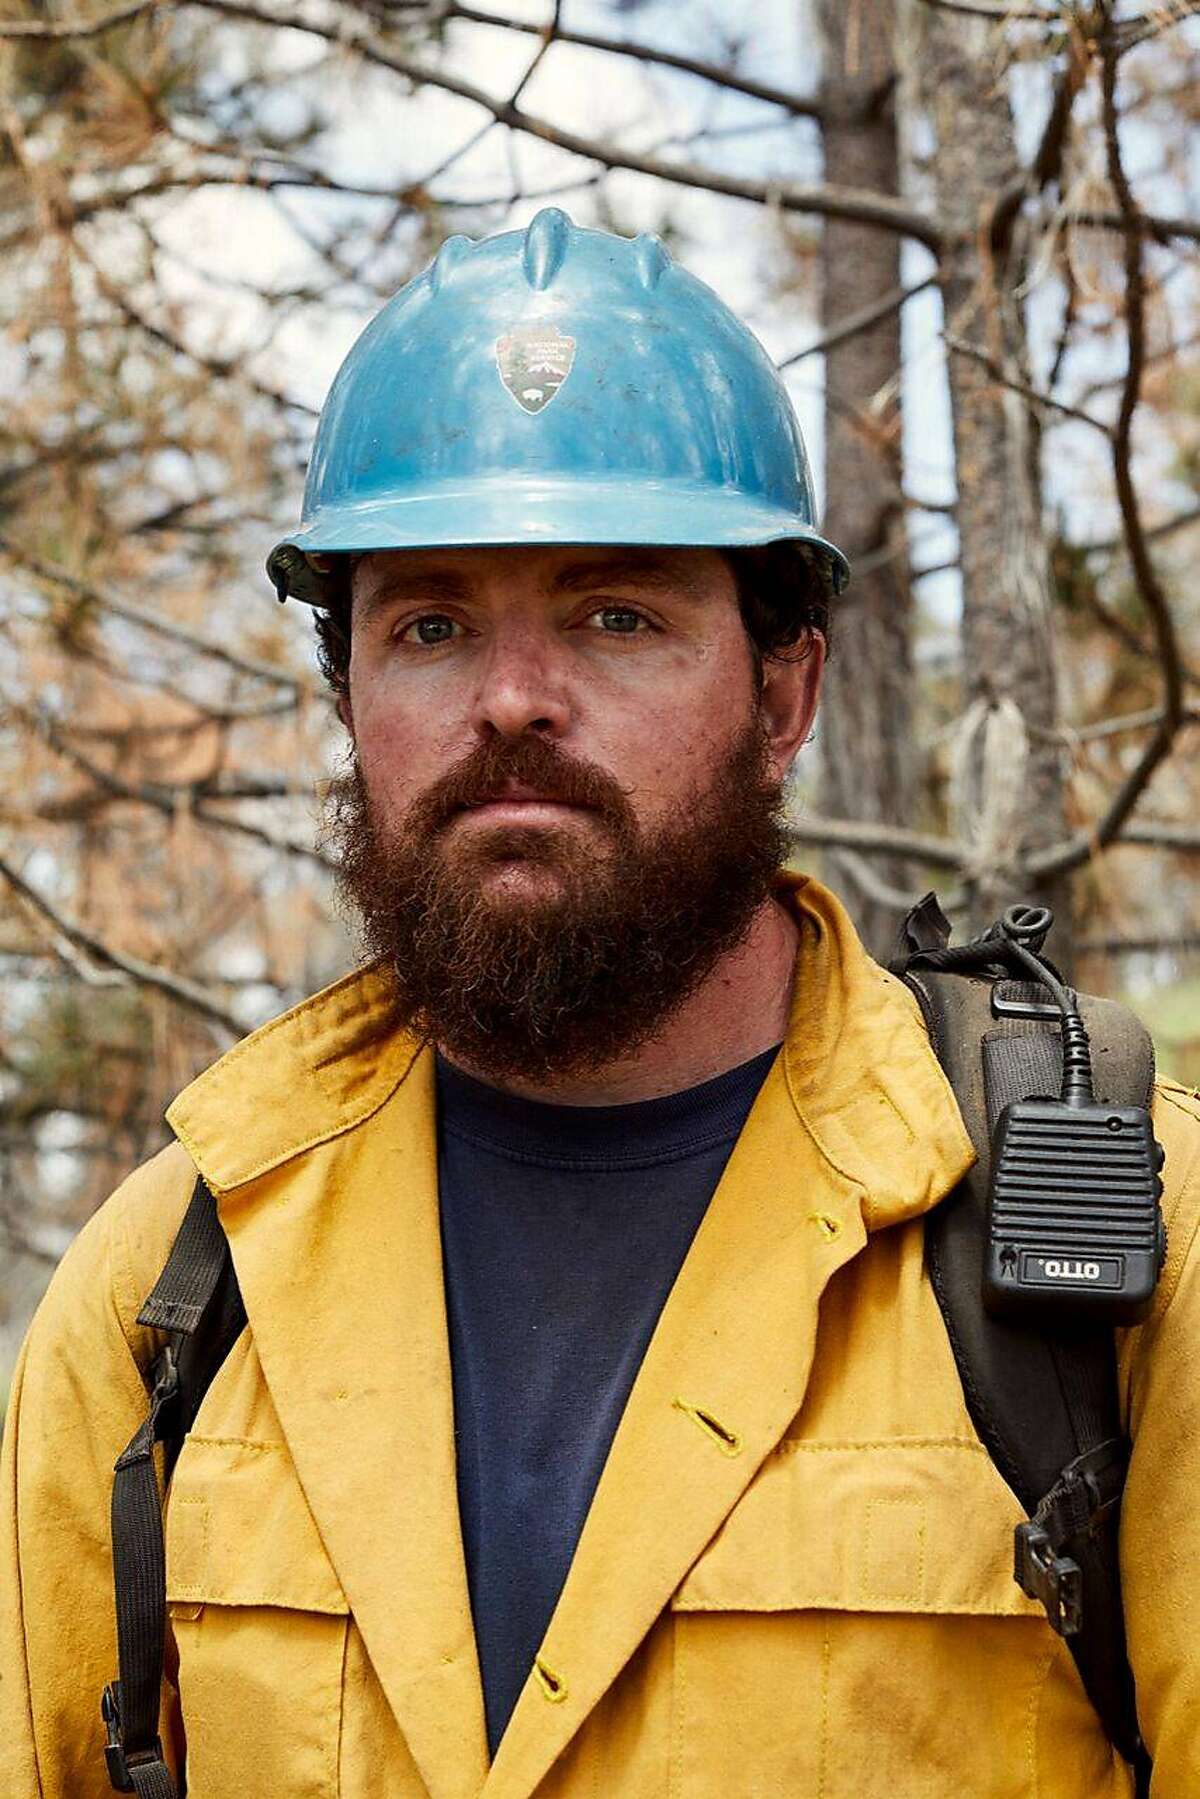 Captain Brian Hughes, a 33-year-old firefighter from Sequoia and Kings Canyon national parks, died after being hit by a falling tree on Sunday, July 29, 2018 while fighting the Ferguson Fire in Mariposa County near Yosemite.